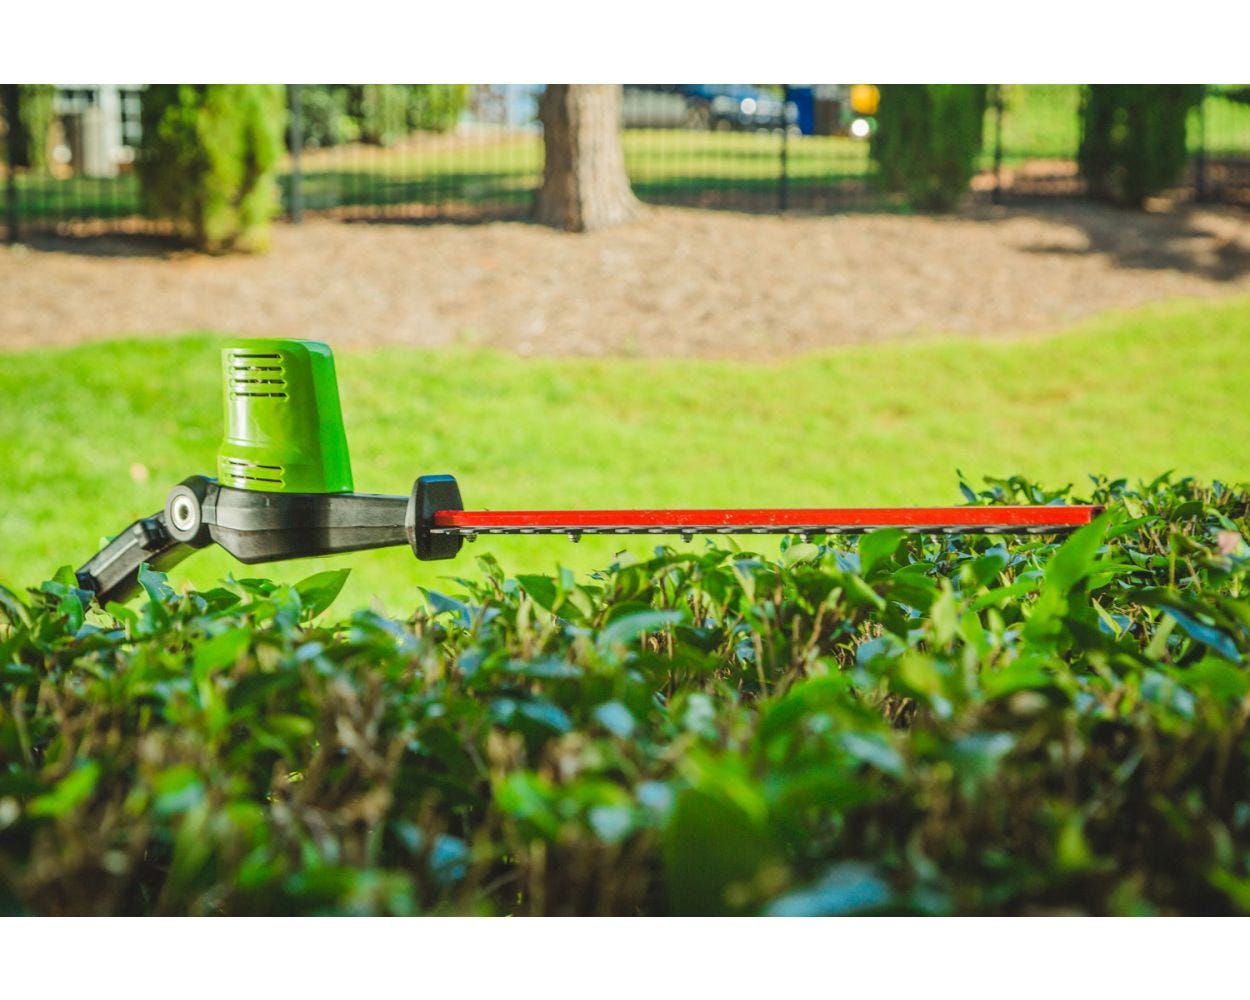 Pro 60V 20 inch Cordless Pole Hedge Trimmer with 2.0 Ah Battery